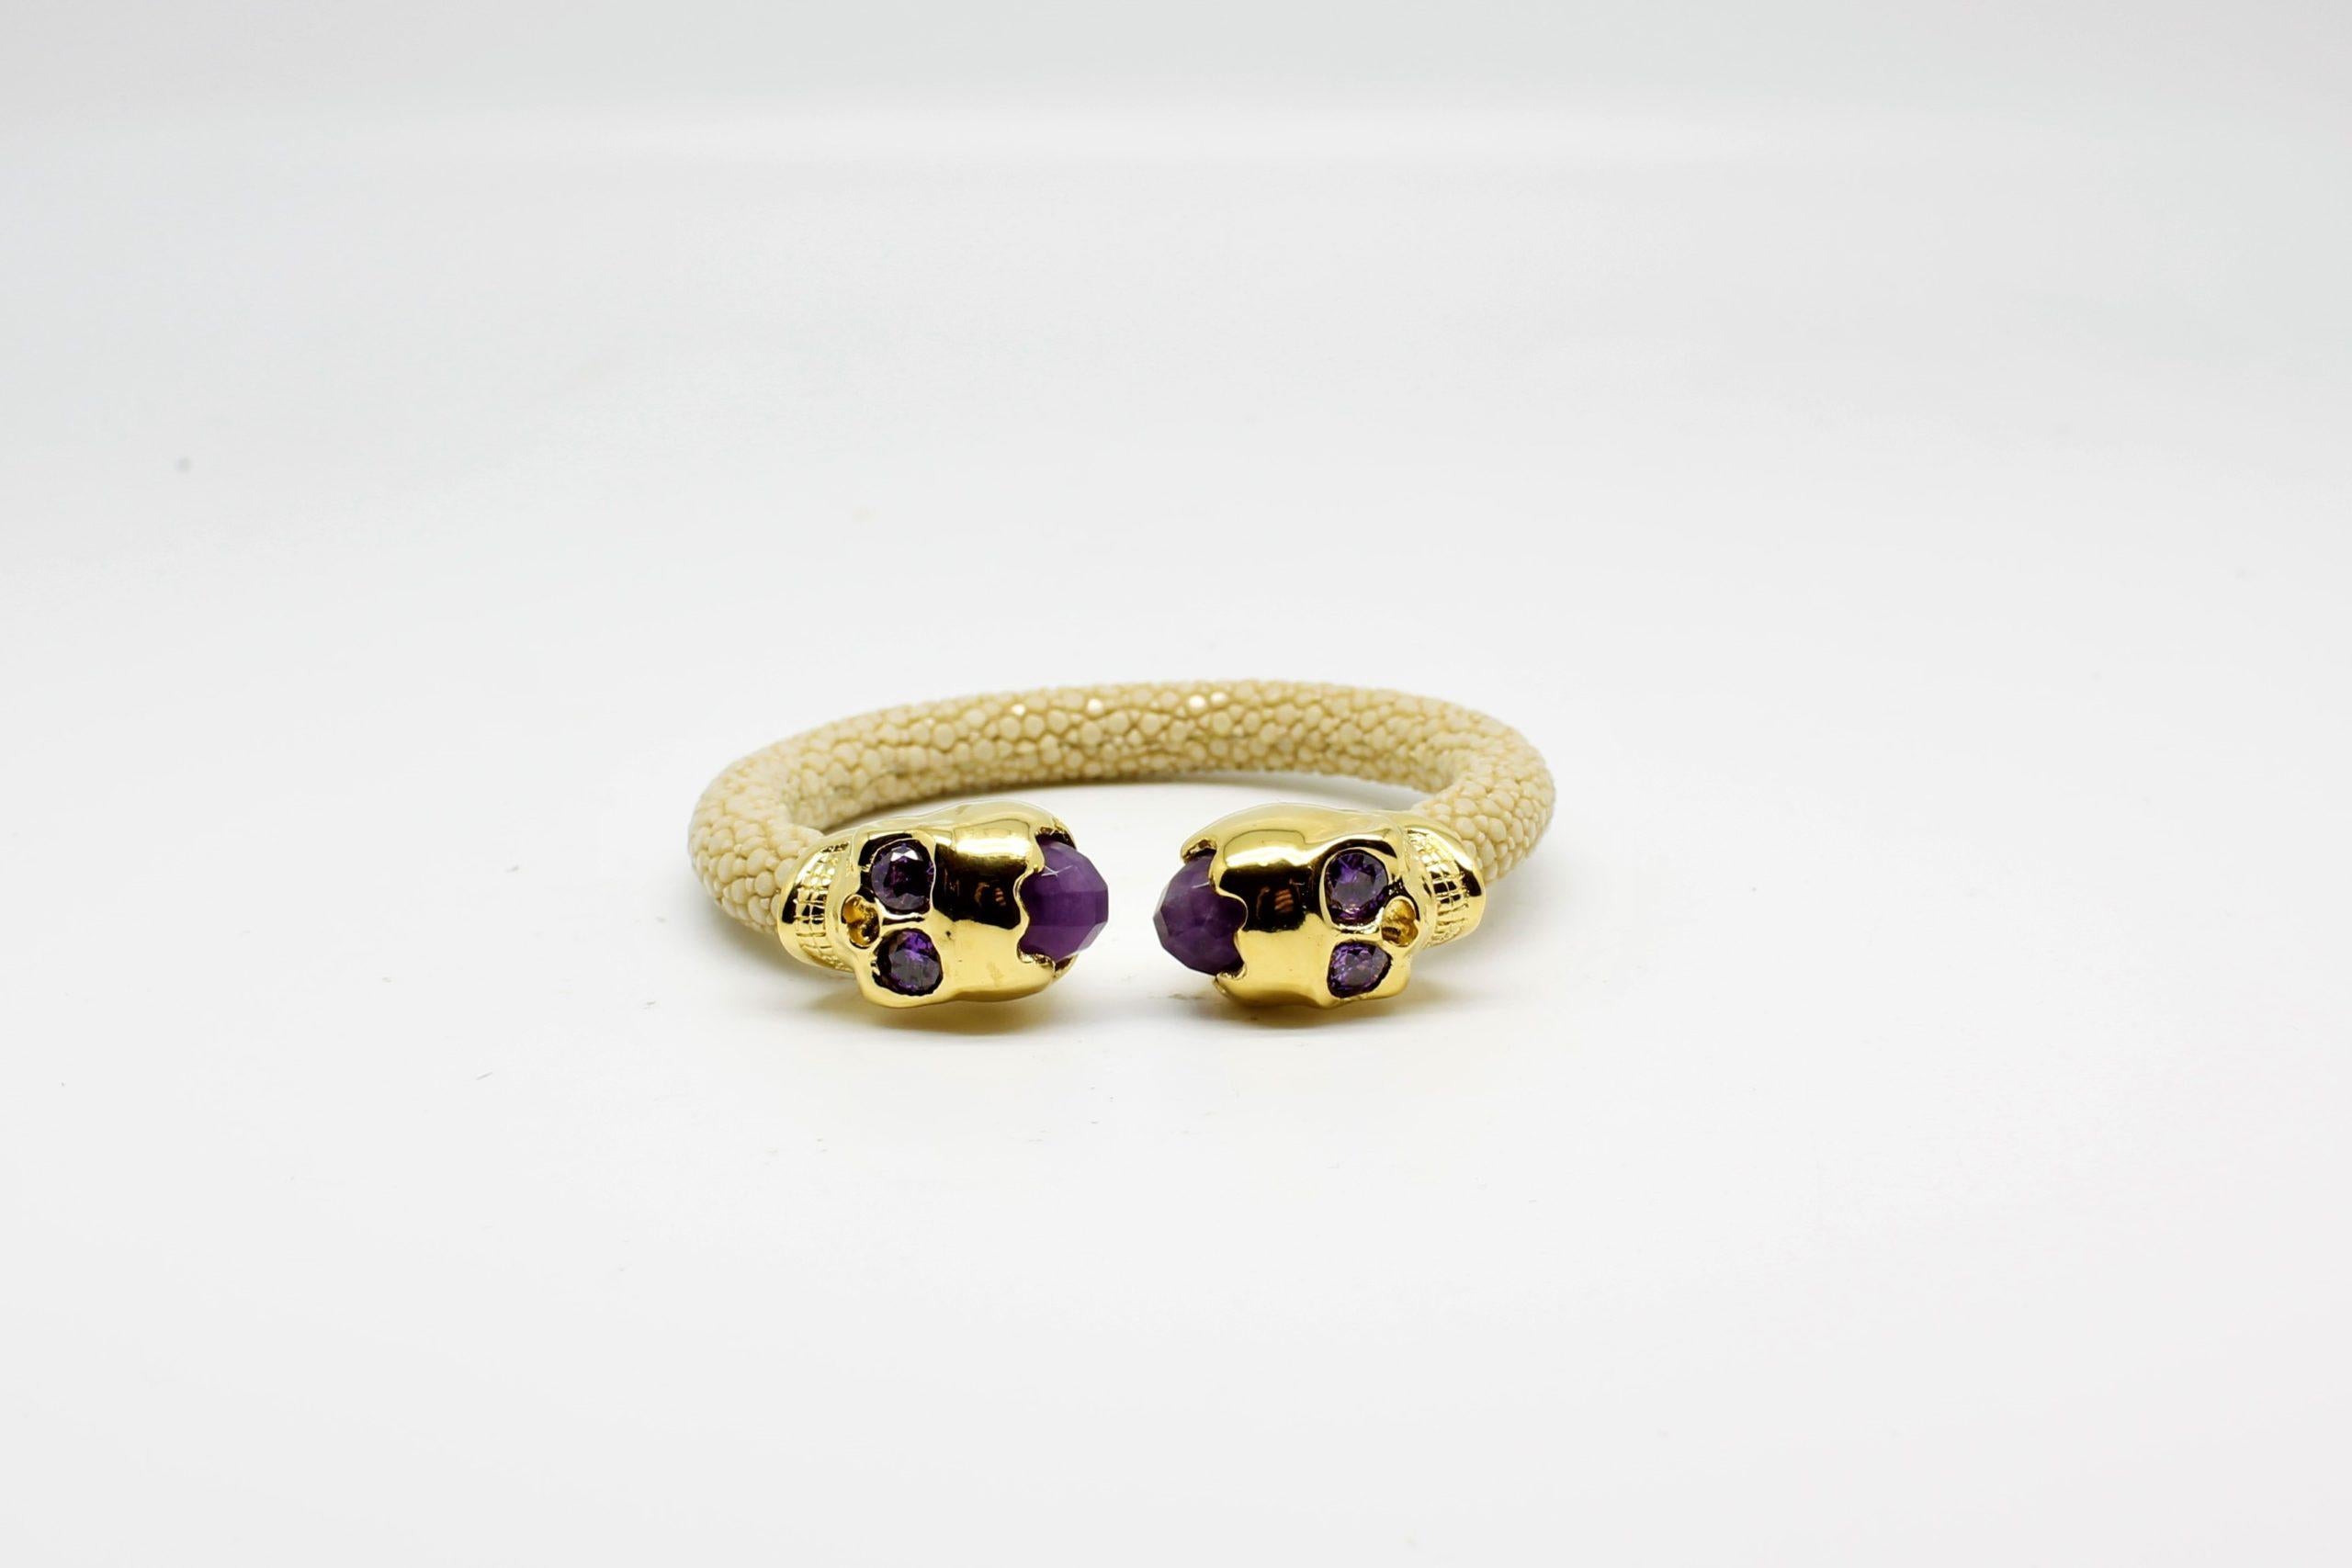 Maroon Galuchat Skin Bangle Bracelet with Skull Gold-Plated & Coral Stones 6